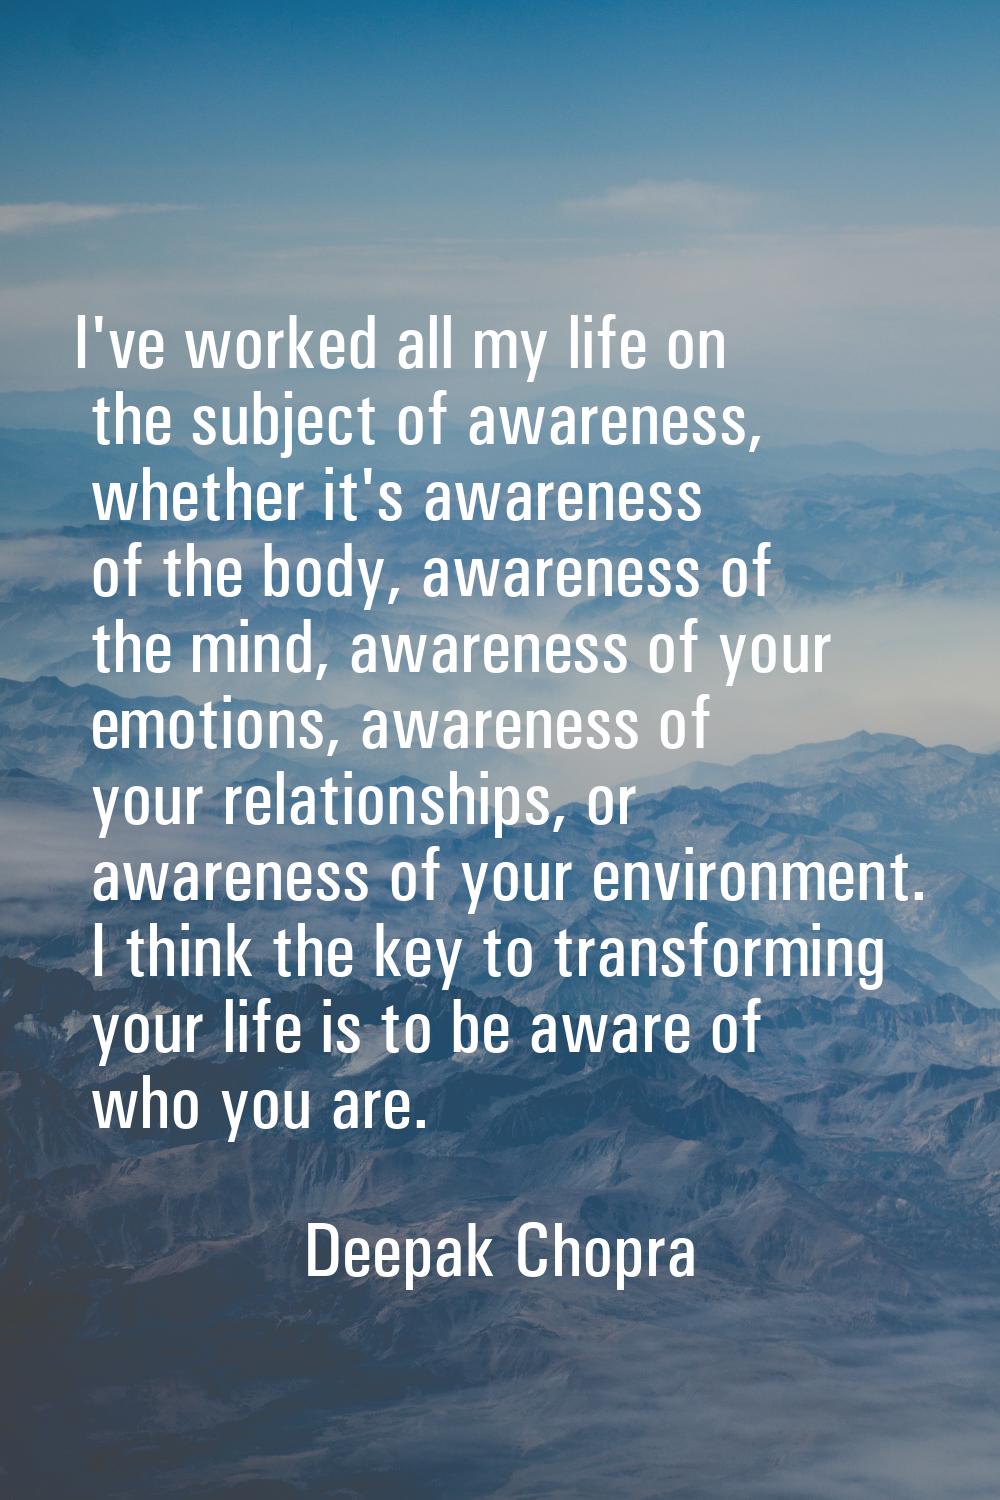 I've worked all my life on the subject of awareness, whether it's awareness of the body, awareness 